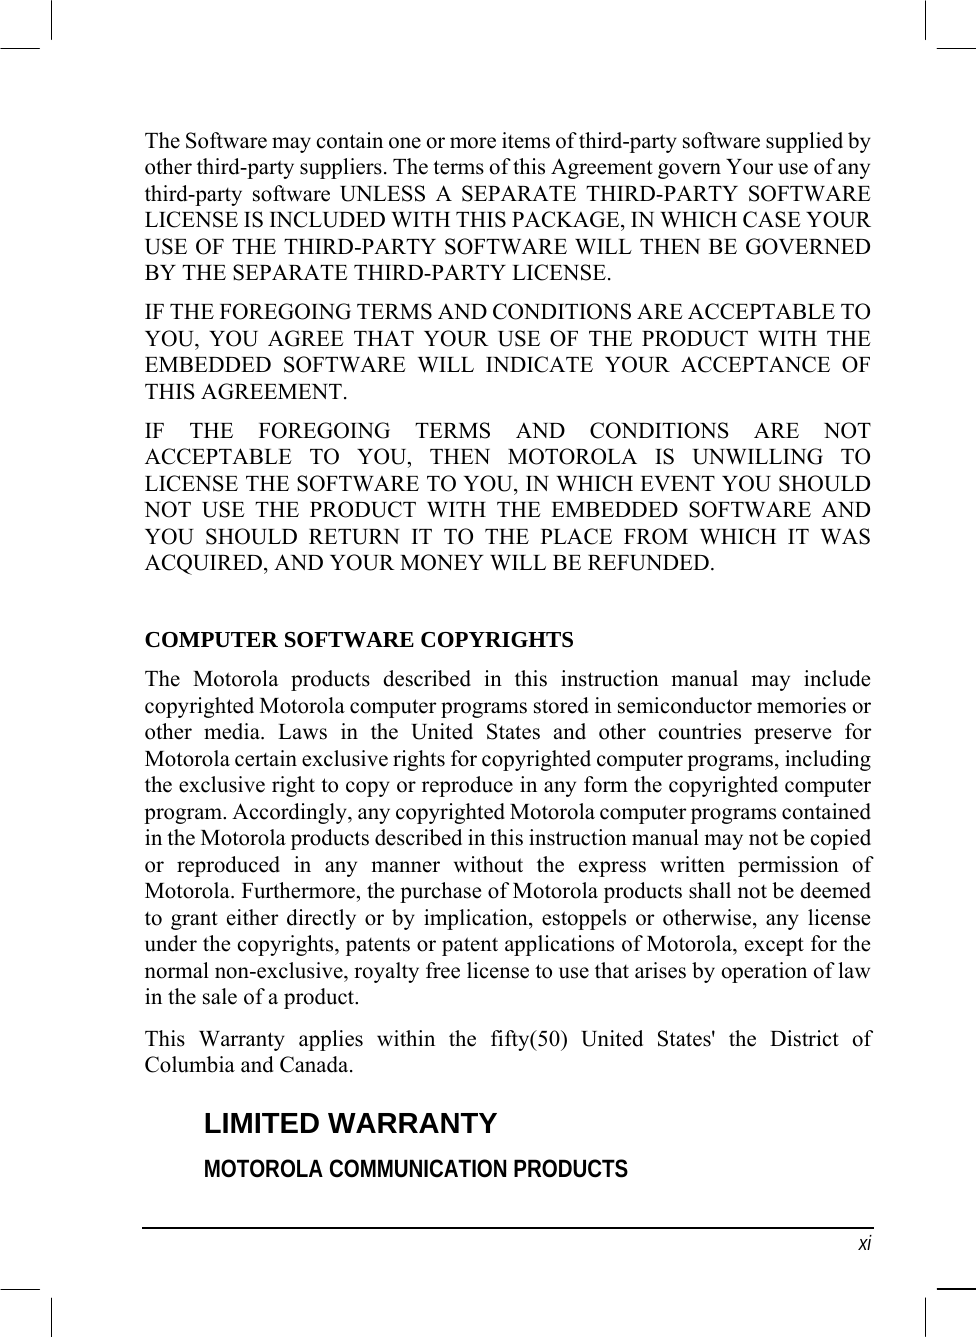   xi The Software may contain one or more items of third-party software supplied by other third-party suppliers. The terms of this Agreement govern Your use of any third-party software UNLESS A SEPARATE THIRD-PARTY SOFTWARE LICENSE IS INCLUDED WITH THIS PACKAGE, IN WHICH CASE YOUR USE OF THE THIRD-PARTY SOFTWARE WILL THEN BE GOVERNED BY THE SEPARATE THIRD-PARTY LICENSE. IF THE FOREGOING TERMS AND CONDITIONS ARE ACCEPTABLE TO YOU, YOU AGREE THAT YOUR USE OF THE PRODUCT WITH THE EMBEDDED SOFTWARE WILL INDICATE YOUR ACCEPTANCE OF THIS AGREEMENT. IF THE FOREGOING TERMS AND CONDITIONS ARE NOT ACCEPTABLE TO YOU, THEN MOTOROLA IS UNWILLING TO LICENSE THE SOFTWARE TO YOU, IN WHICH EVENT YOU SHOULD NOT USE THE PRODUCT WITH THE EMBEDDED SOFTWARE AND YOU SHOULD RETURN IT TO THE PLACE FROM WHICH IT WAS ACQUIRED, AND YOUR MONEY WILL BE REFUNDED. COMPUTER SOFTWARE COPYRIGHTS The Motorola products described in this instruction manual may include copyrighted Motorola computer programs stored in semiconductor memories or other media. Laws in the United States and other countries preserve for Motorola certain exclusive rights for copyrighted computer programs, including the exclusive right to copy or reproduce in any form the copyrighted computer program. Accordingly, any copyrighted Motorola computer programs contained in the Motorola products described in this instruction manual may not be copied or reproduced in any manner without the express written permission of Motorola. Furthermore, the purchase of Motorola products shall not be deemed to grant either directly or by implication, estoppels or otherwise, any license under the copyrights, patents or patent applications of Motorola, except for the normal non-exclusive, royalty free license to use that arises by operation of law in the sale of a product. This Warranty applies within the fifty(50) United States&apos; the District of Columbia and Canada. LIMITED WARRANTY MOTOROLA COMMUNICATION PRODUCTS 